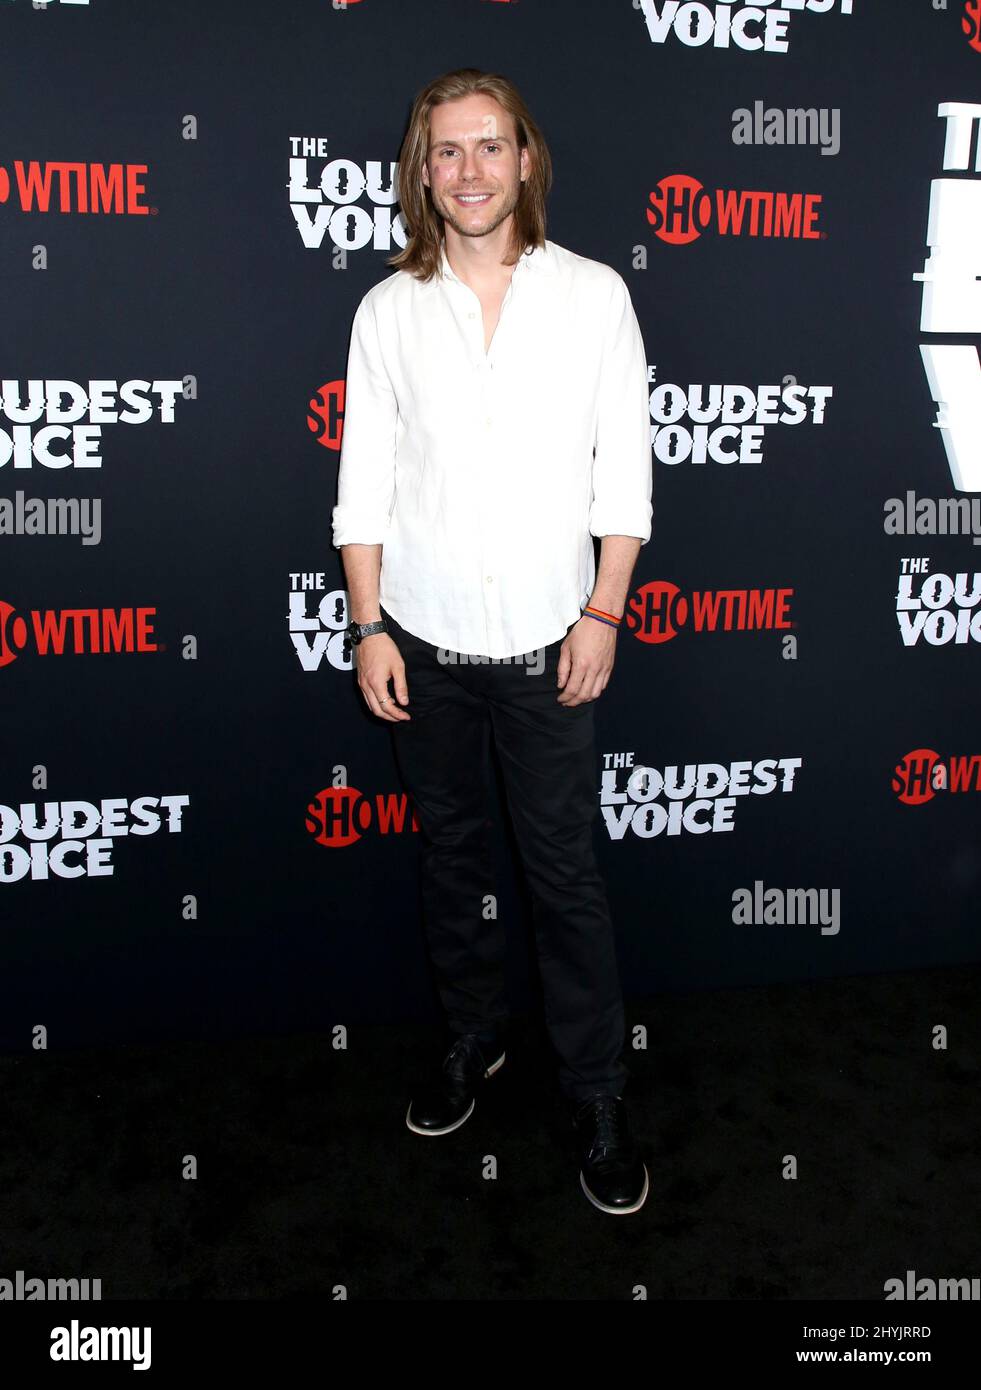 Zach Booth attending 'The Loudest Voice' Premiere held at The Paris Theatre on June 24, 2019 in New York City, NY Stock Photo